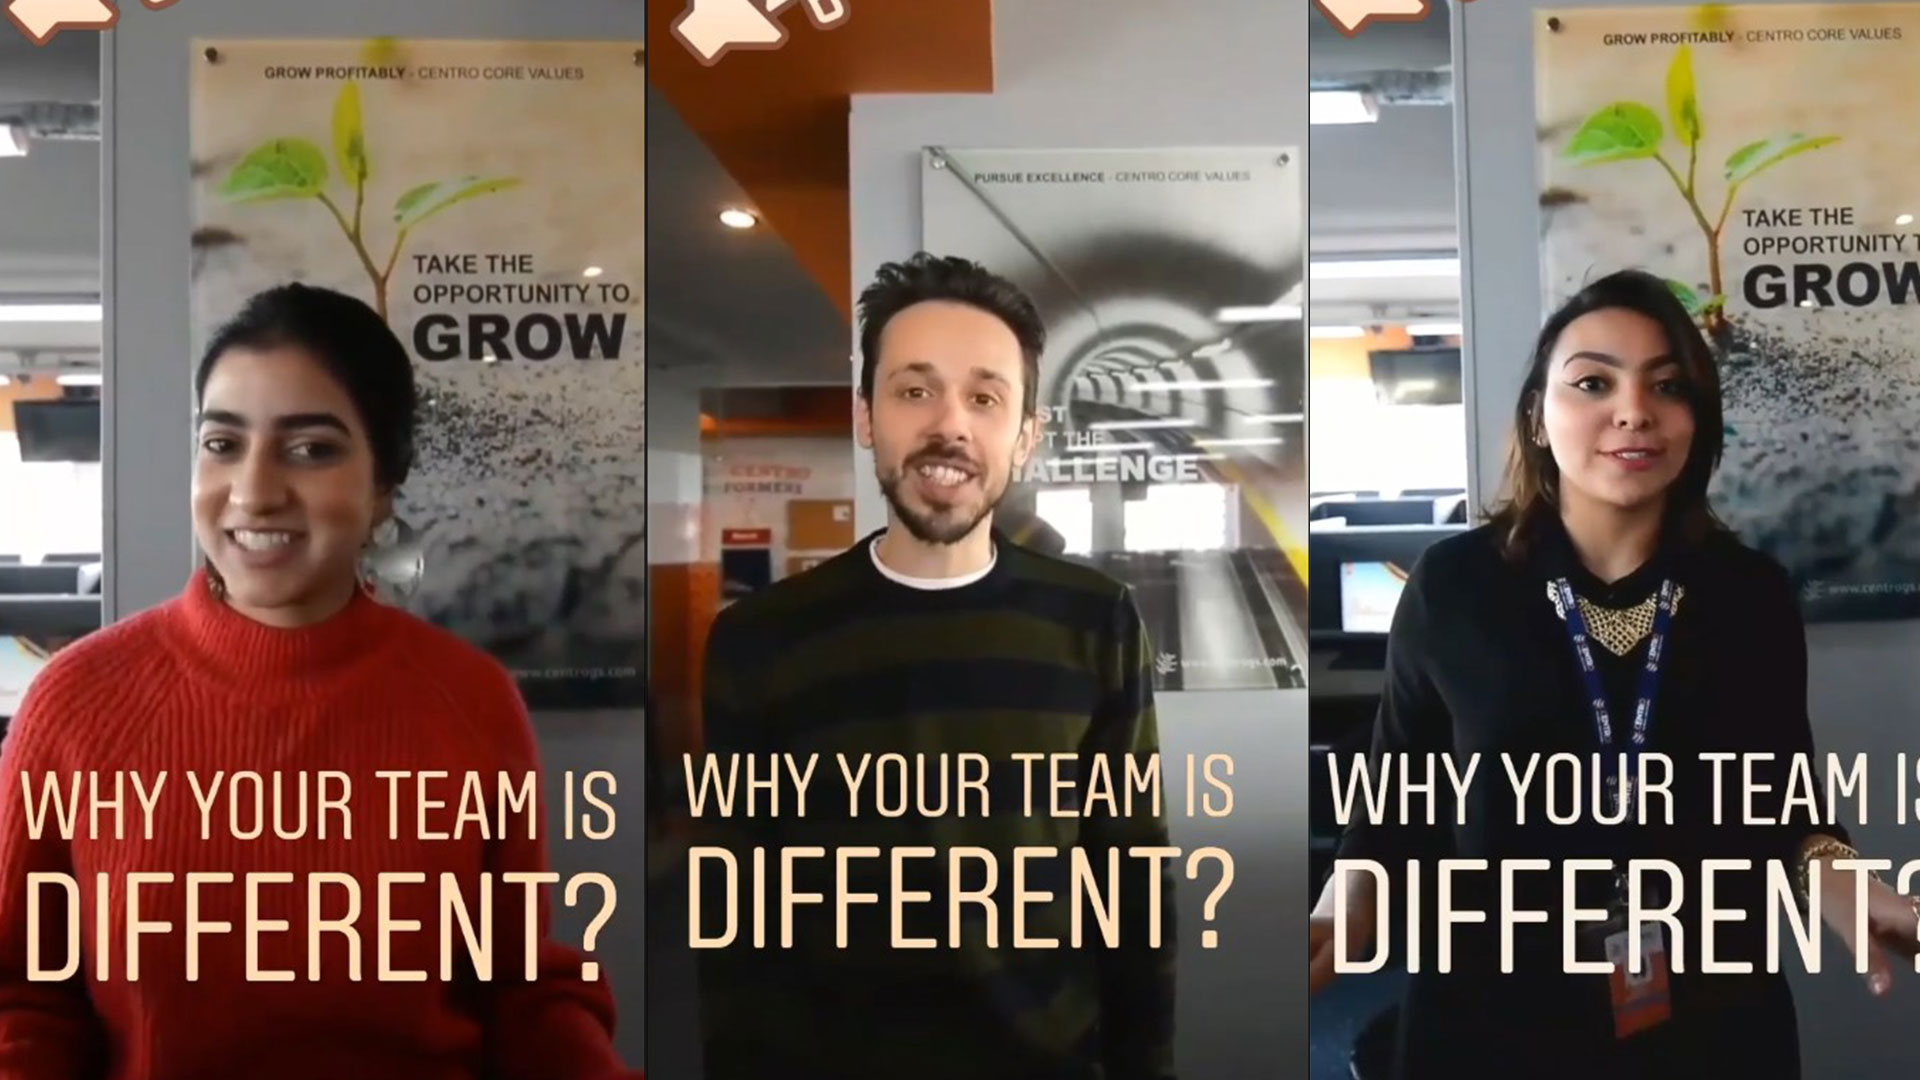 Why is Your Team Different?